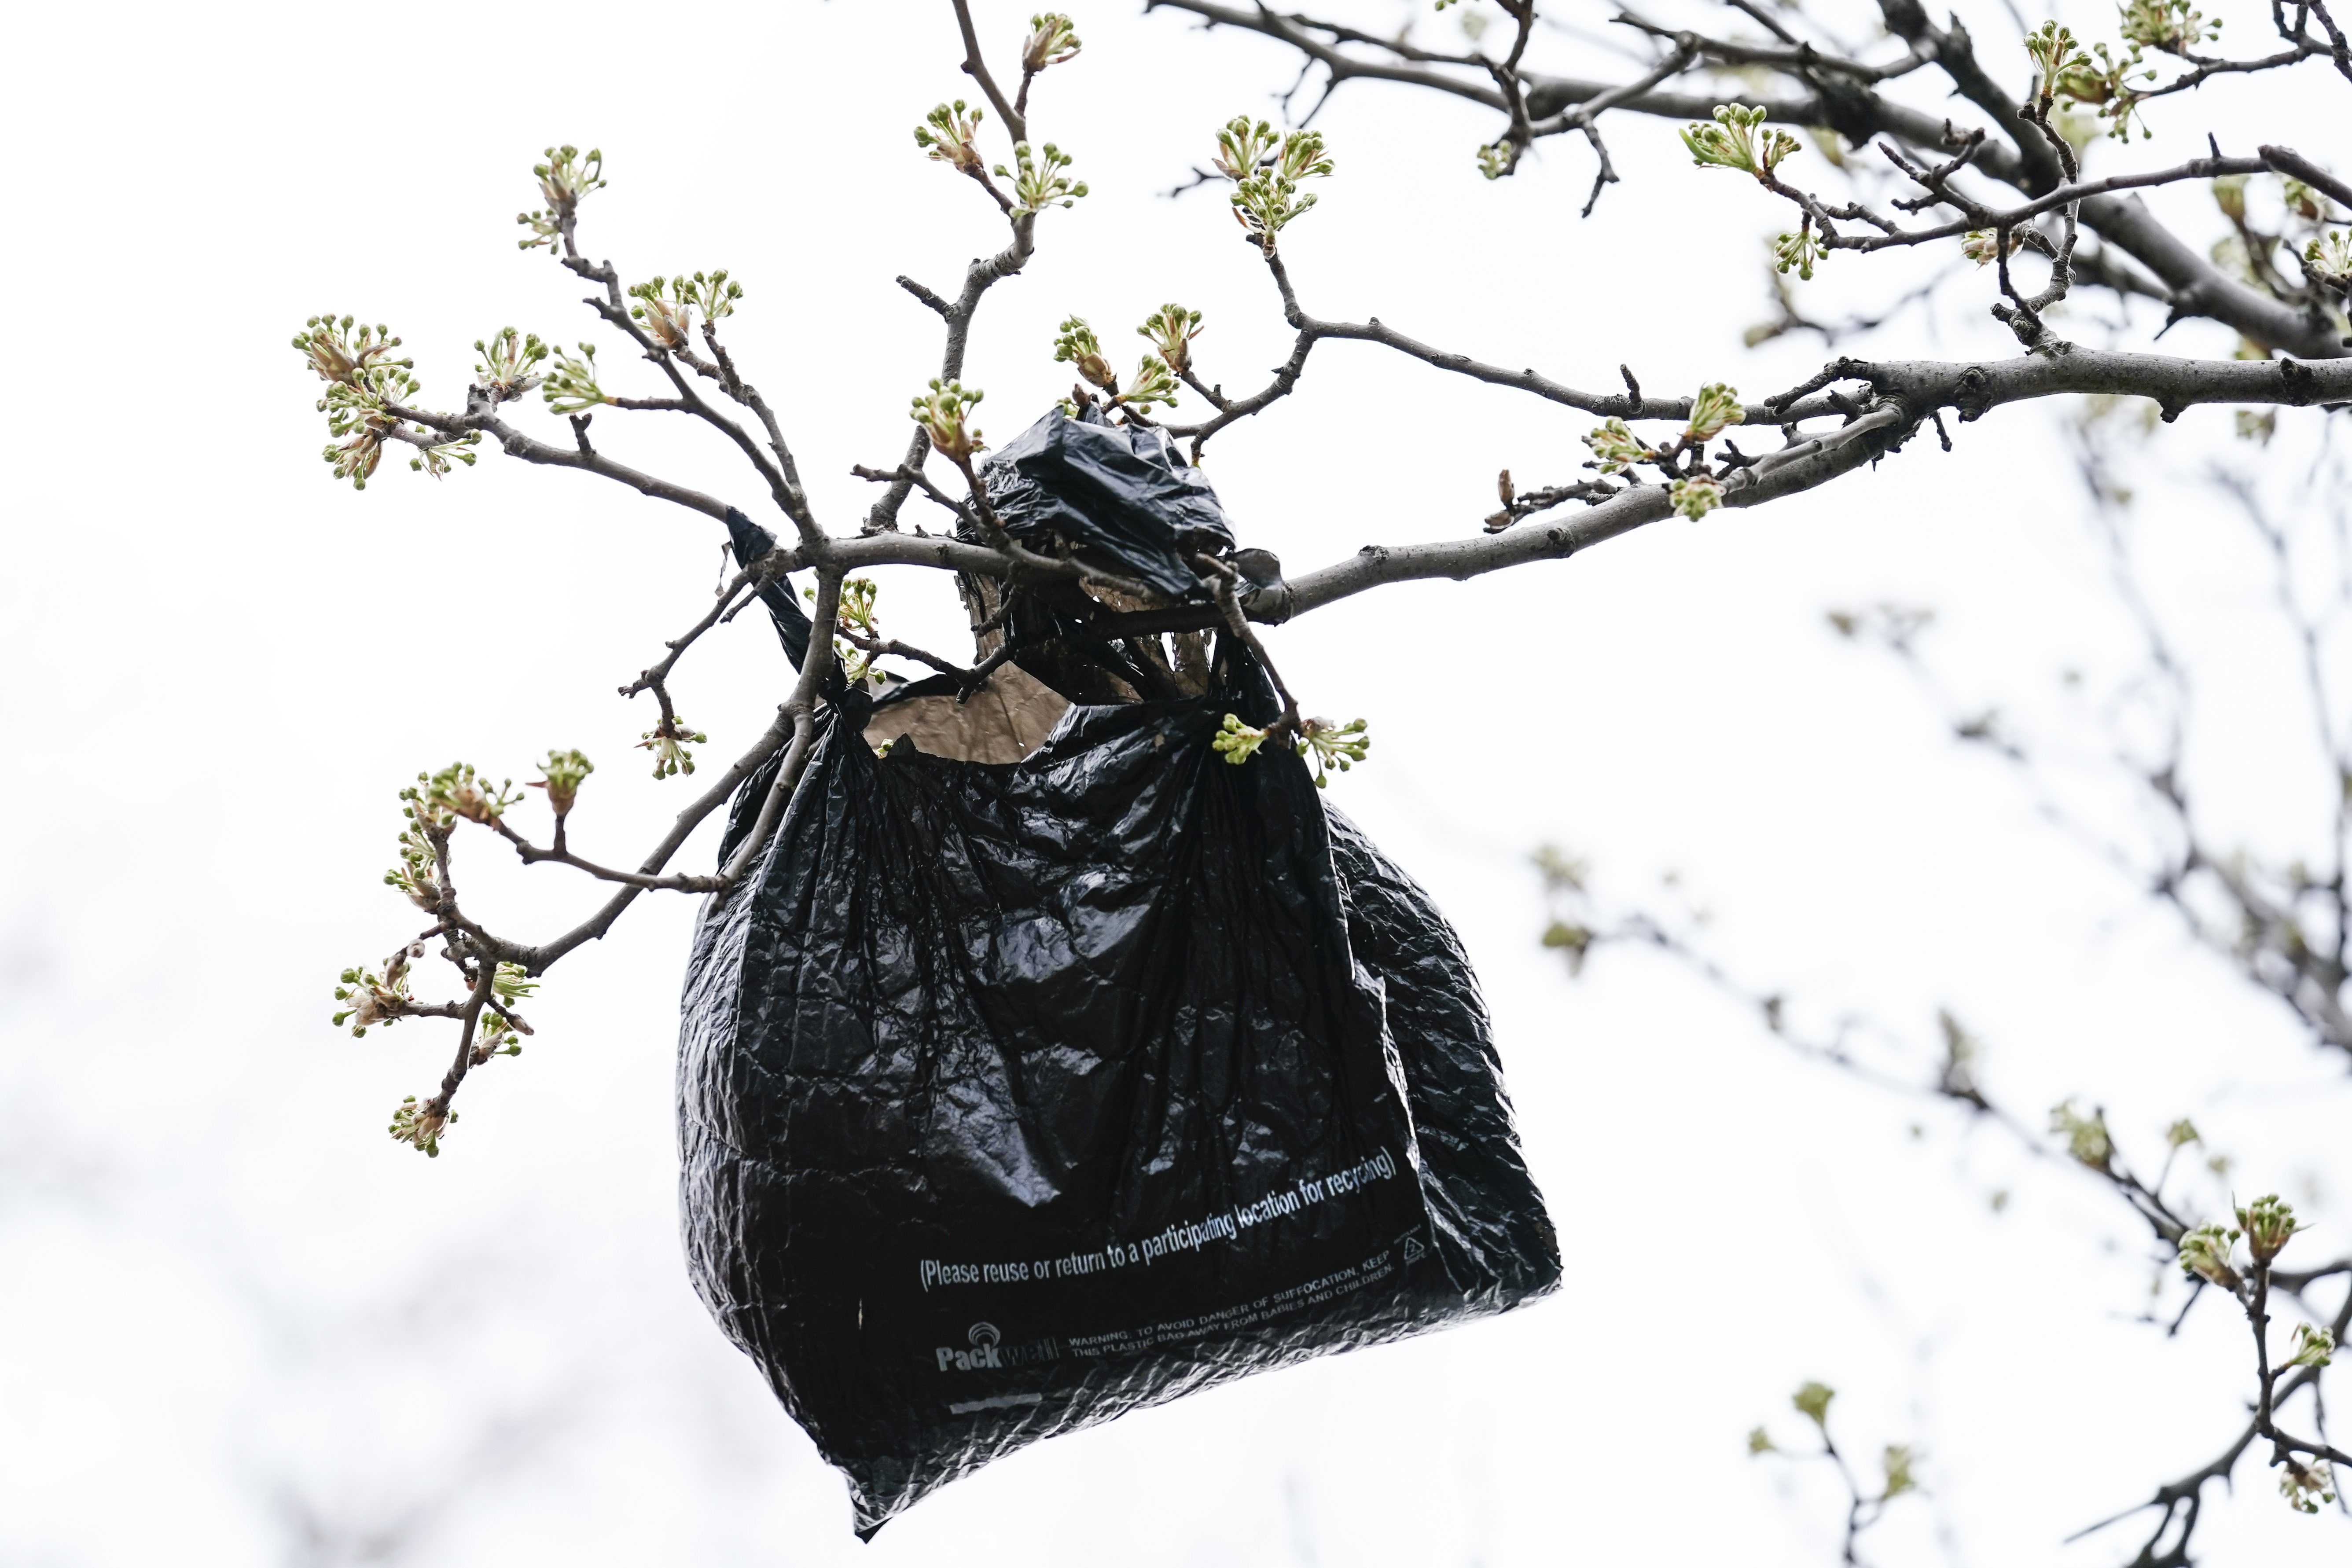 Report evaluates plastic bag recycling programs at retail